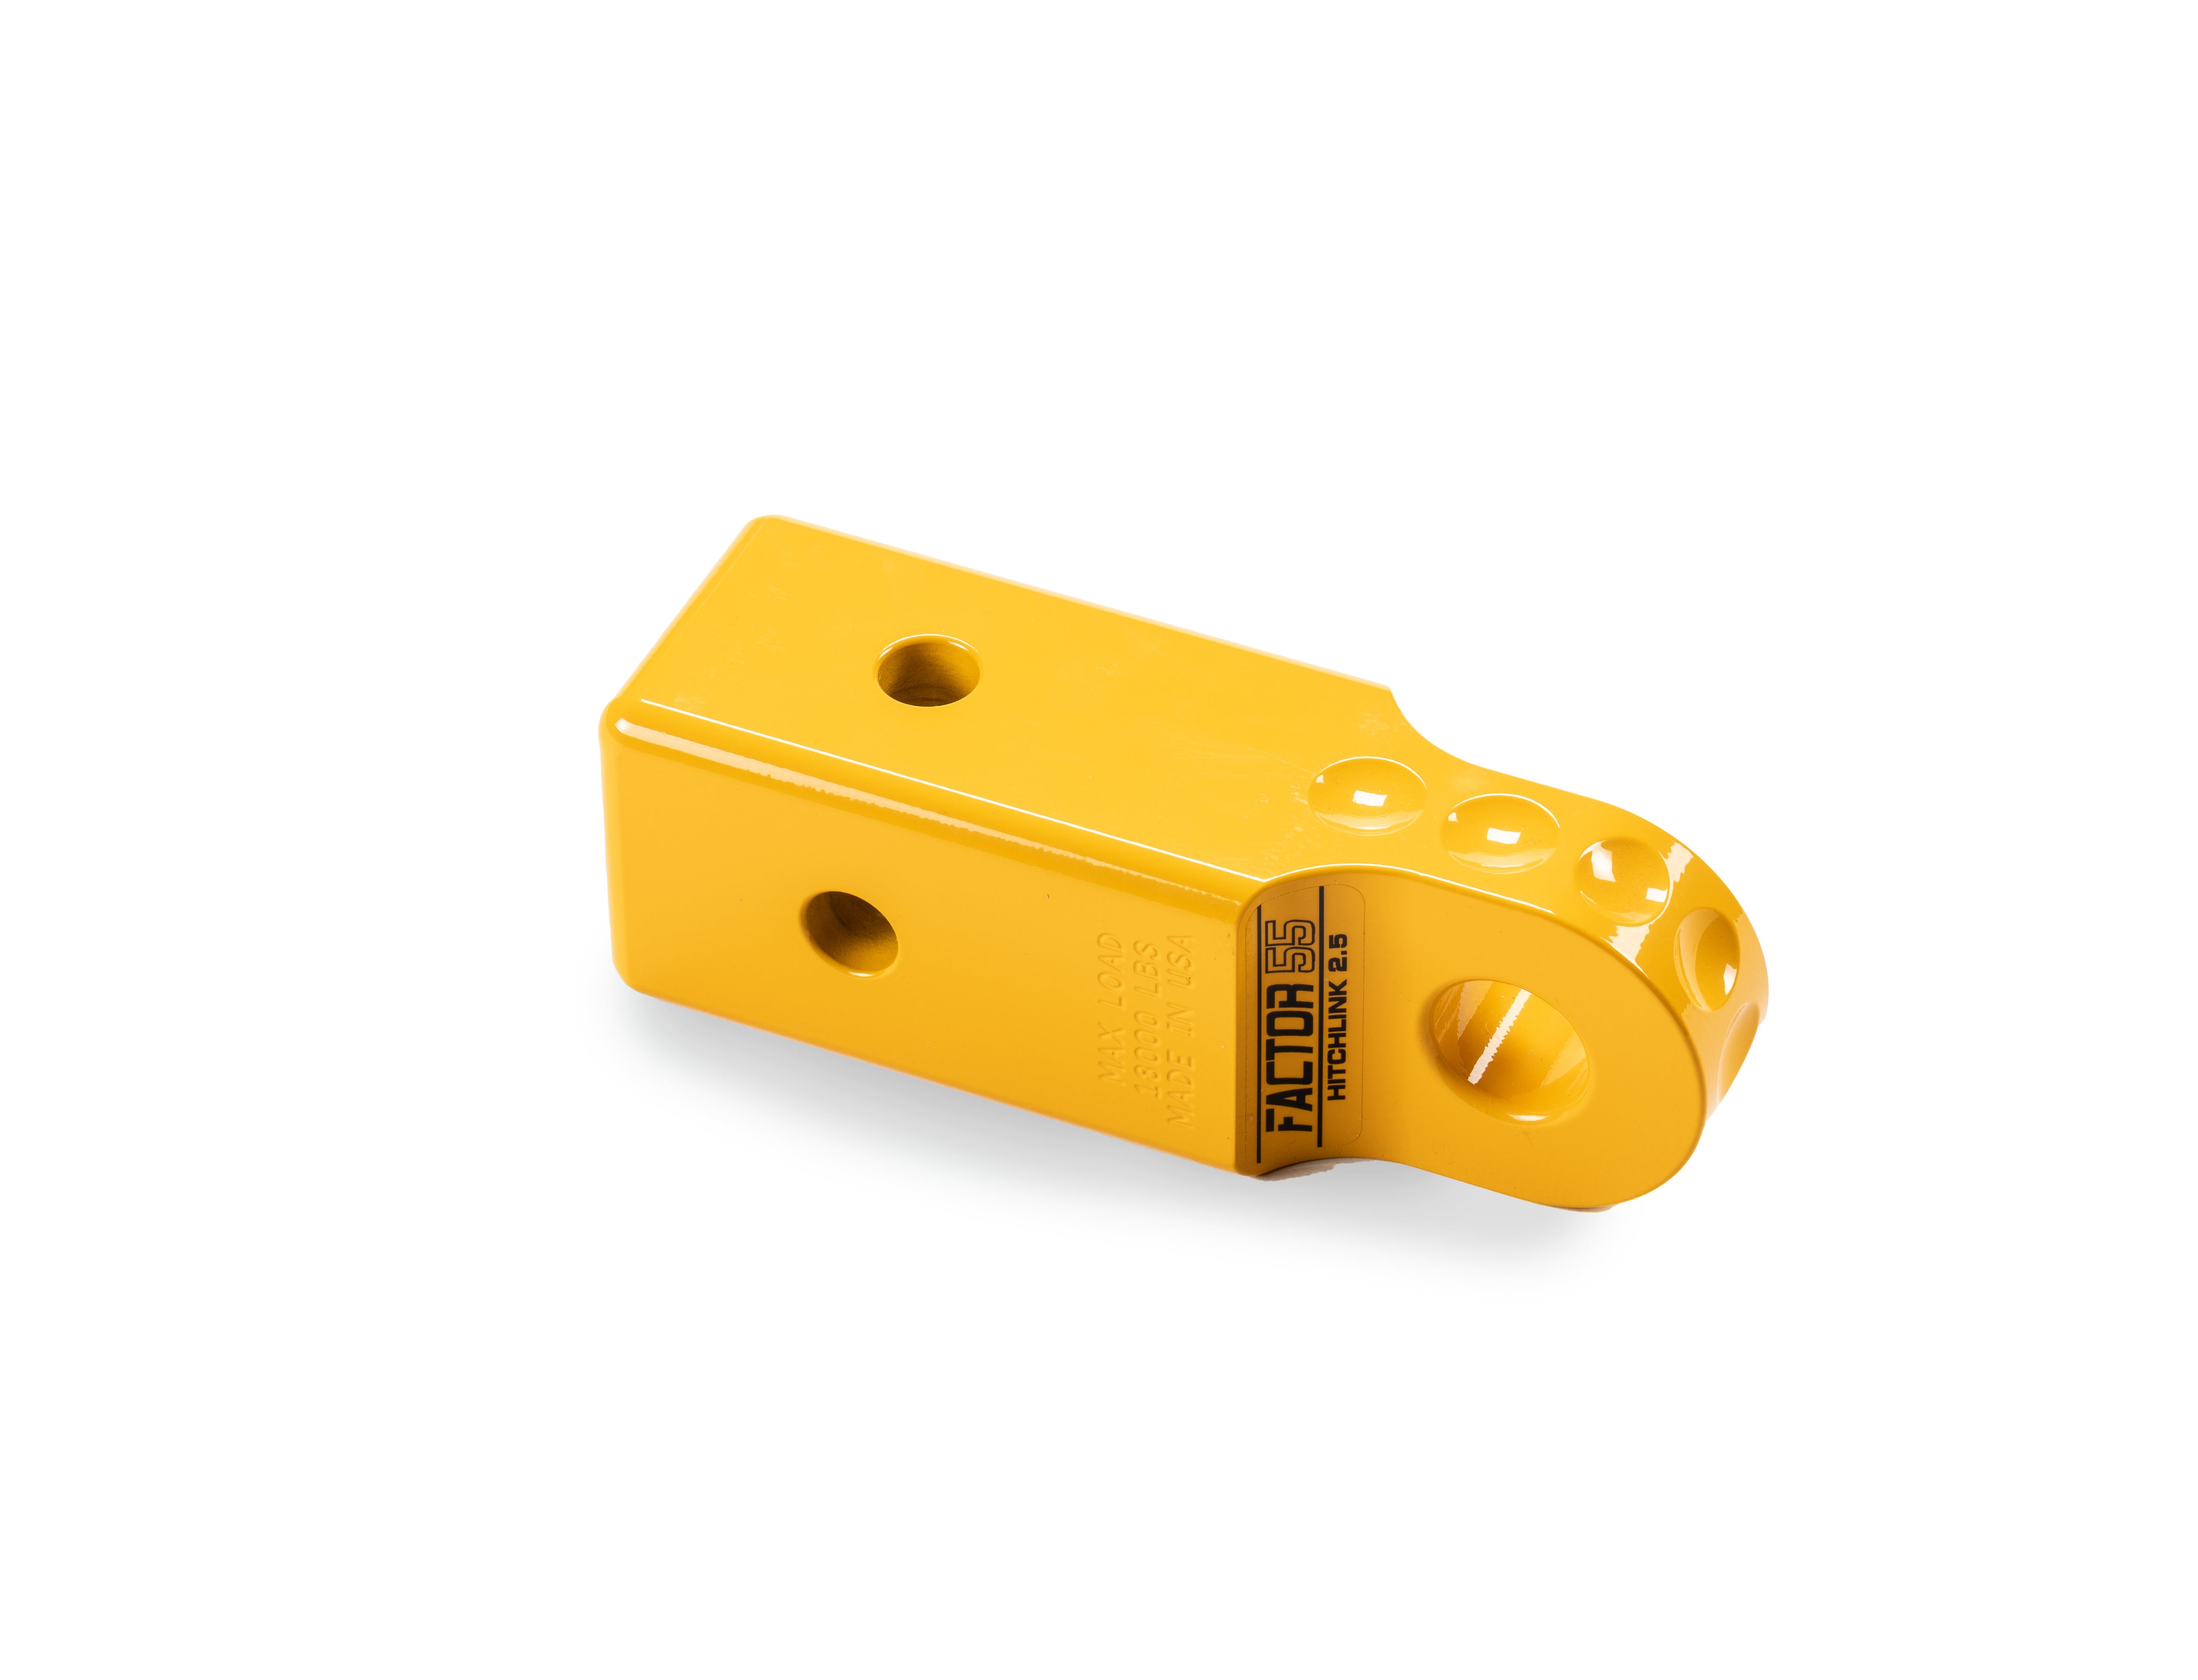 Factor 55 00022-03 Hitchlink 2.5 (2.5 Receivers) - Yellow